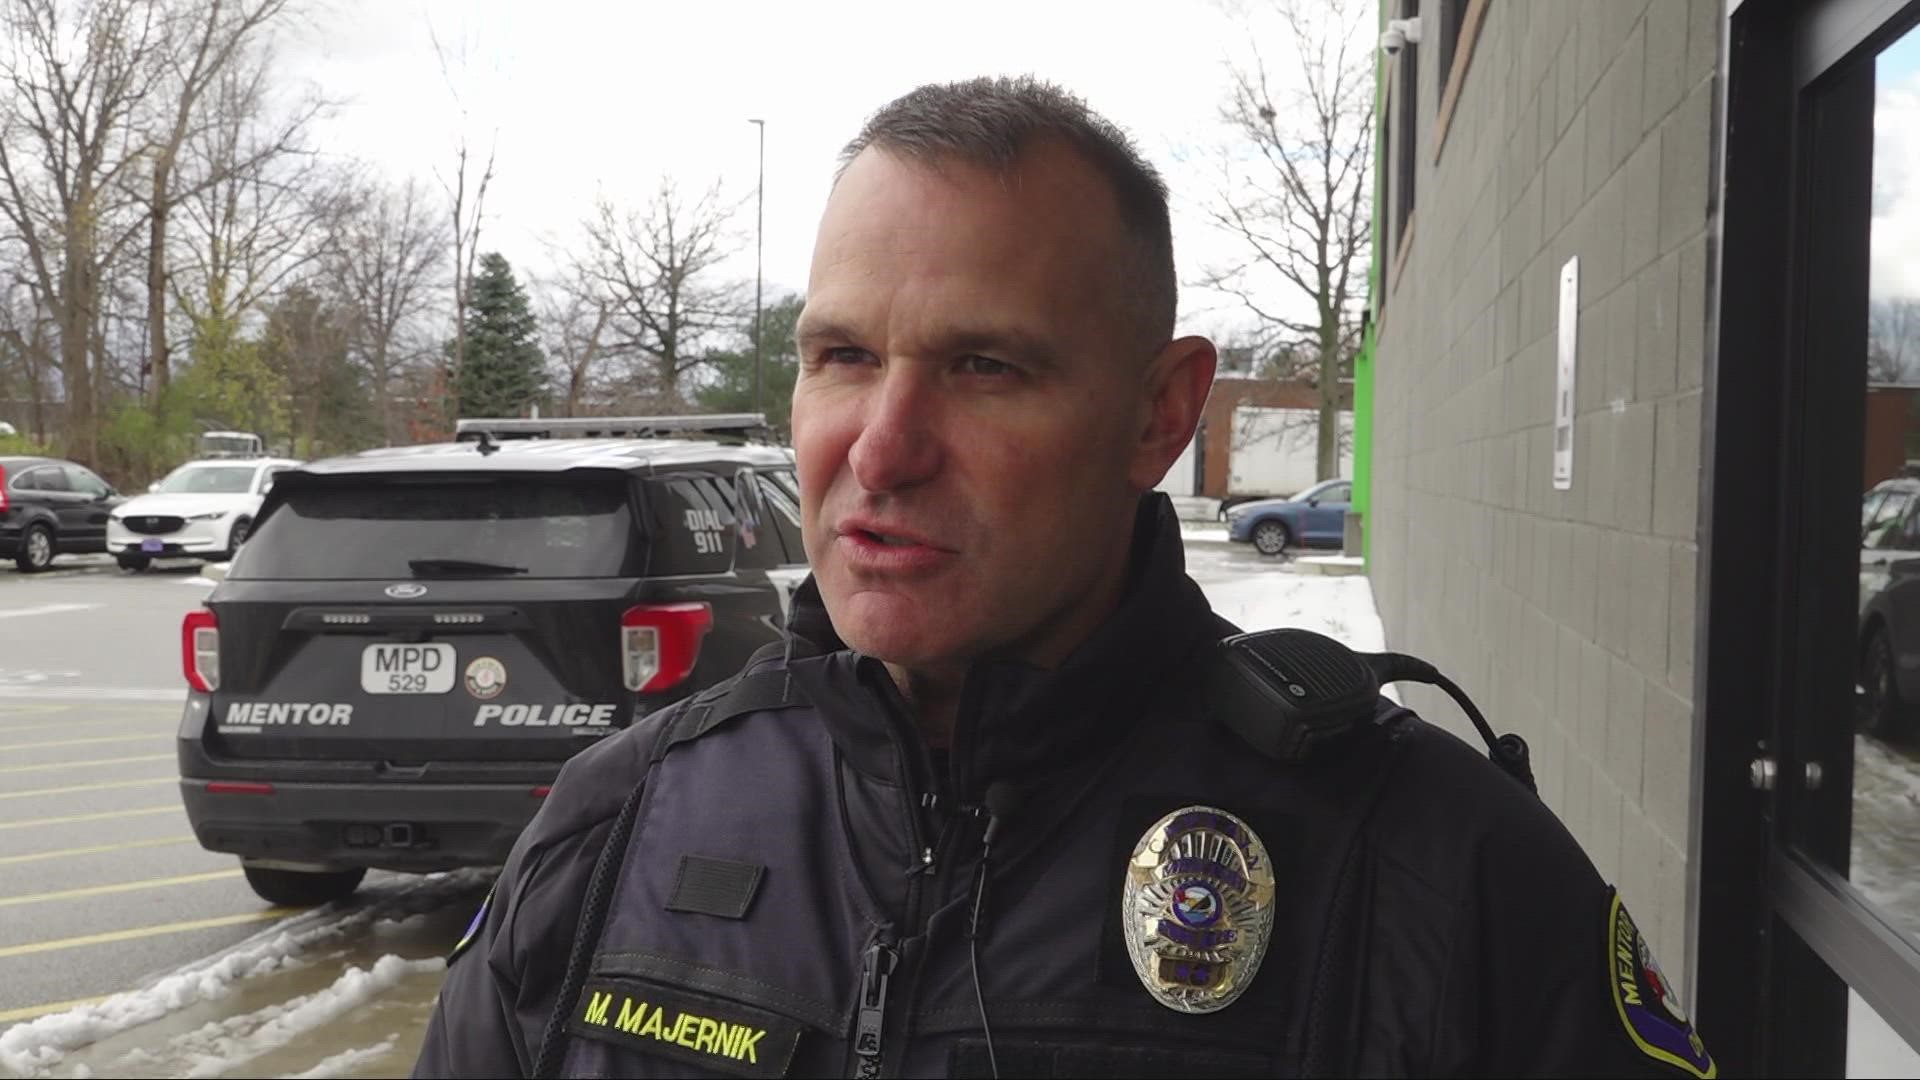 Mentor Police Captain Mike Majernik has a message for holiday shoppers in Northeast Ohio, "If you plan on stealing, don't come to Mentor."